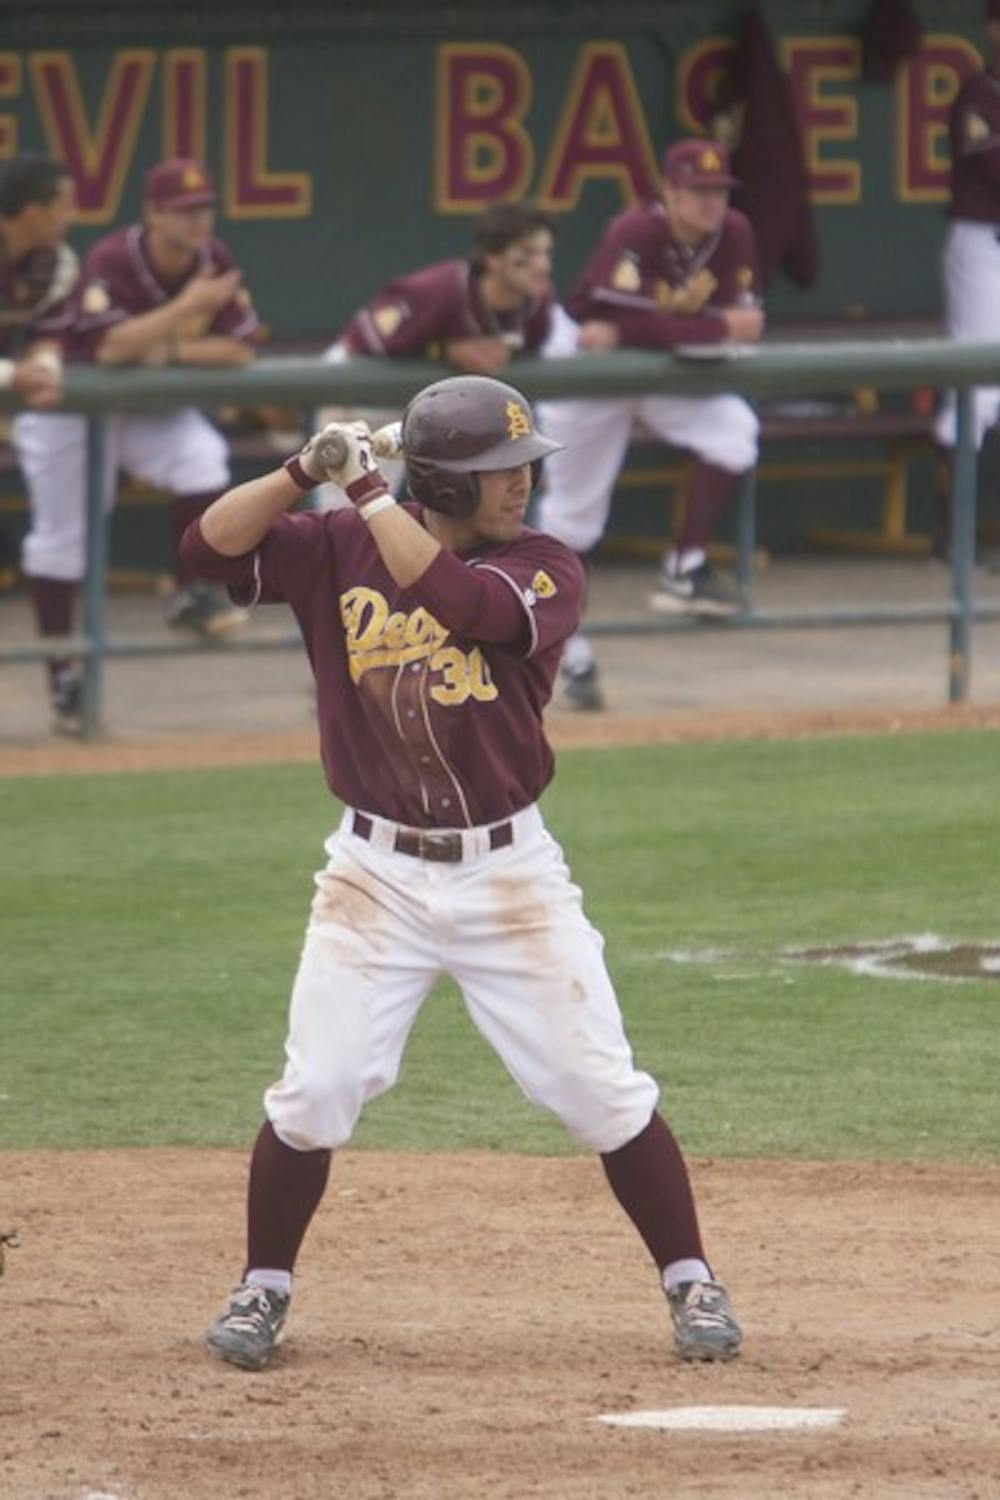 The Little Things: ASU junior infielder Riccio Torrez awaits the pitch against Delaware on Feb. 26. After scoring just one run in ten hits against Cal State Bakersfield on Thursday, the Sun Devils capitalized on scoring opportunities to win the next three games. (Photo by Scott Stuk)